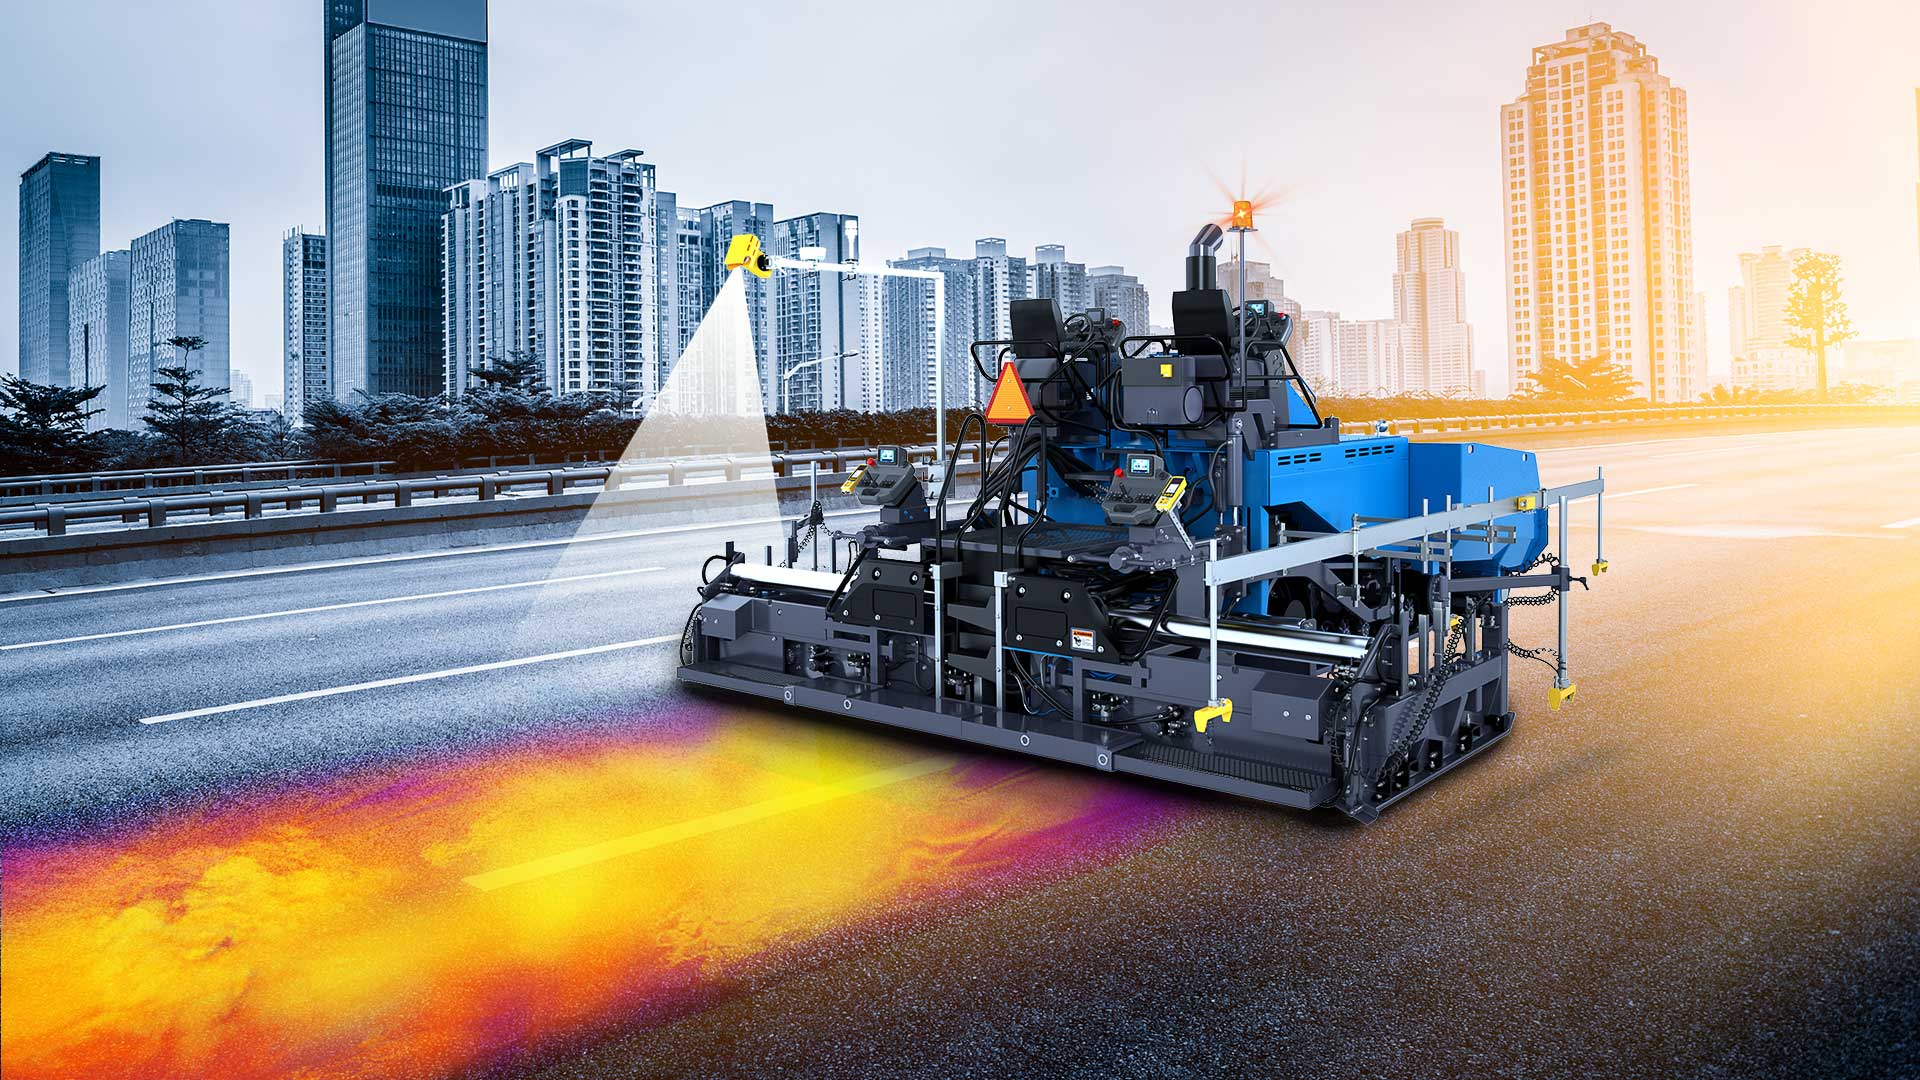 Blue asphlat paver equipped with Pave-IR system with thermal reading projected on asphalt surface.